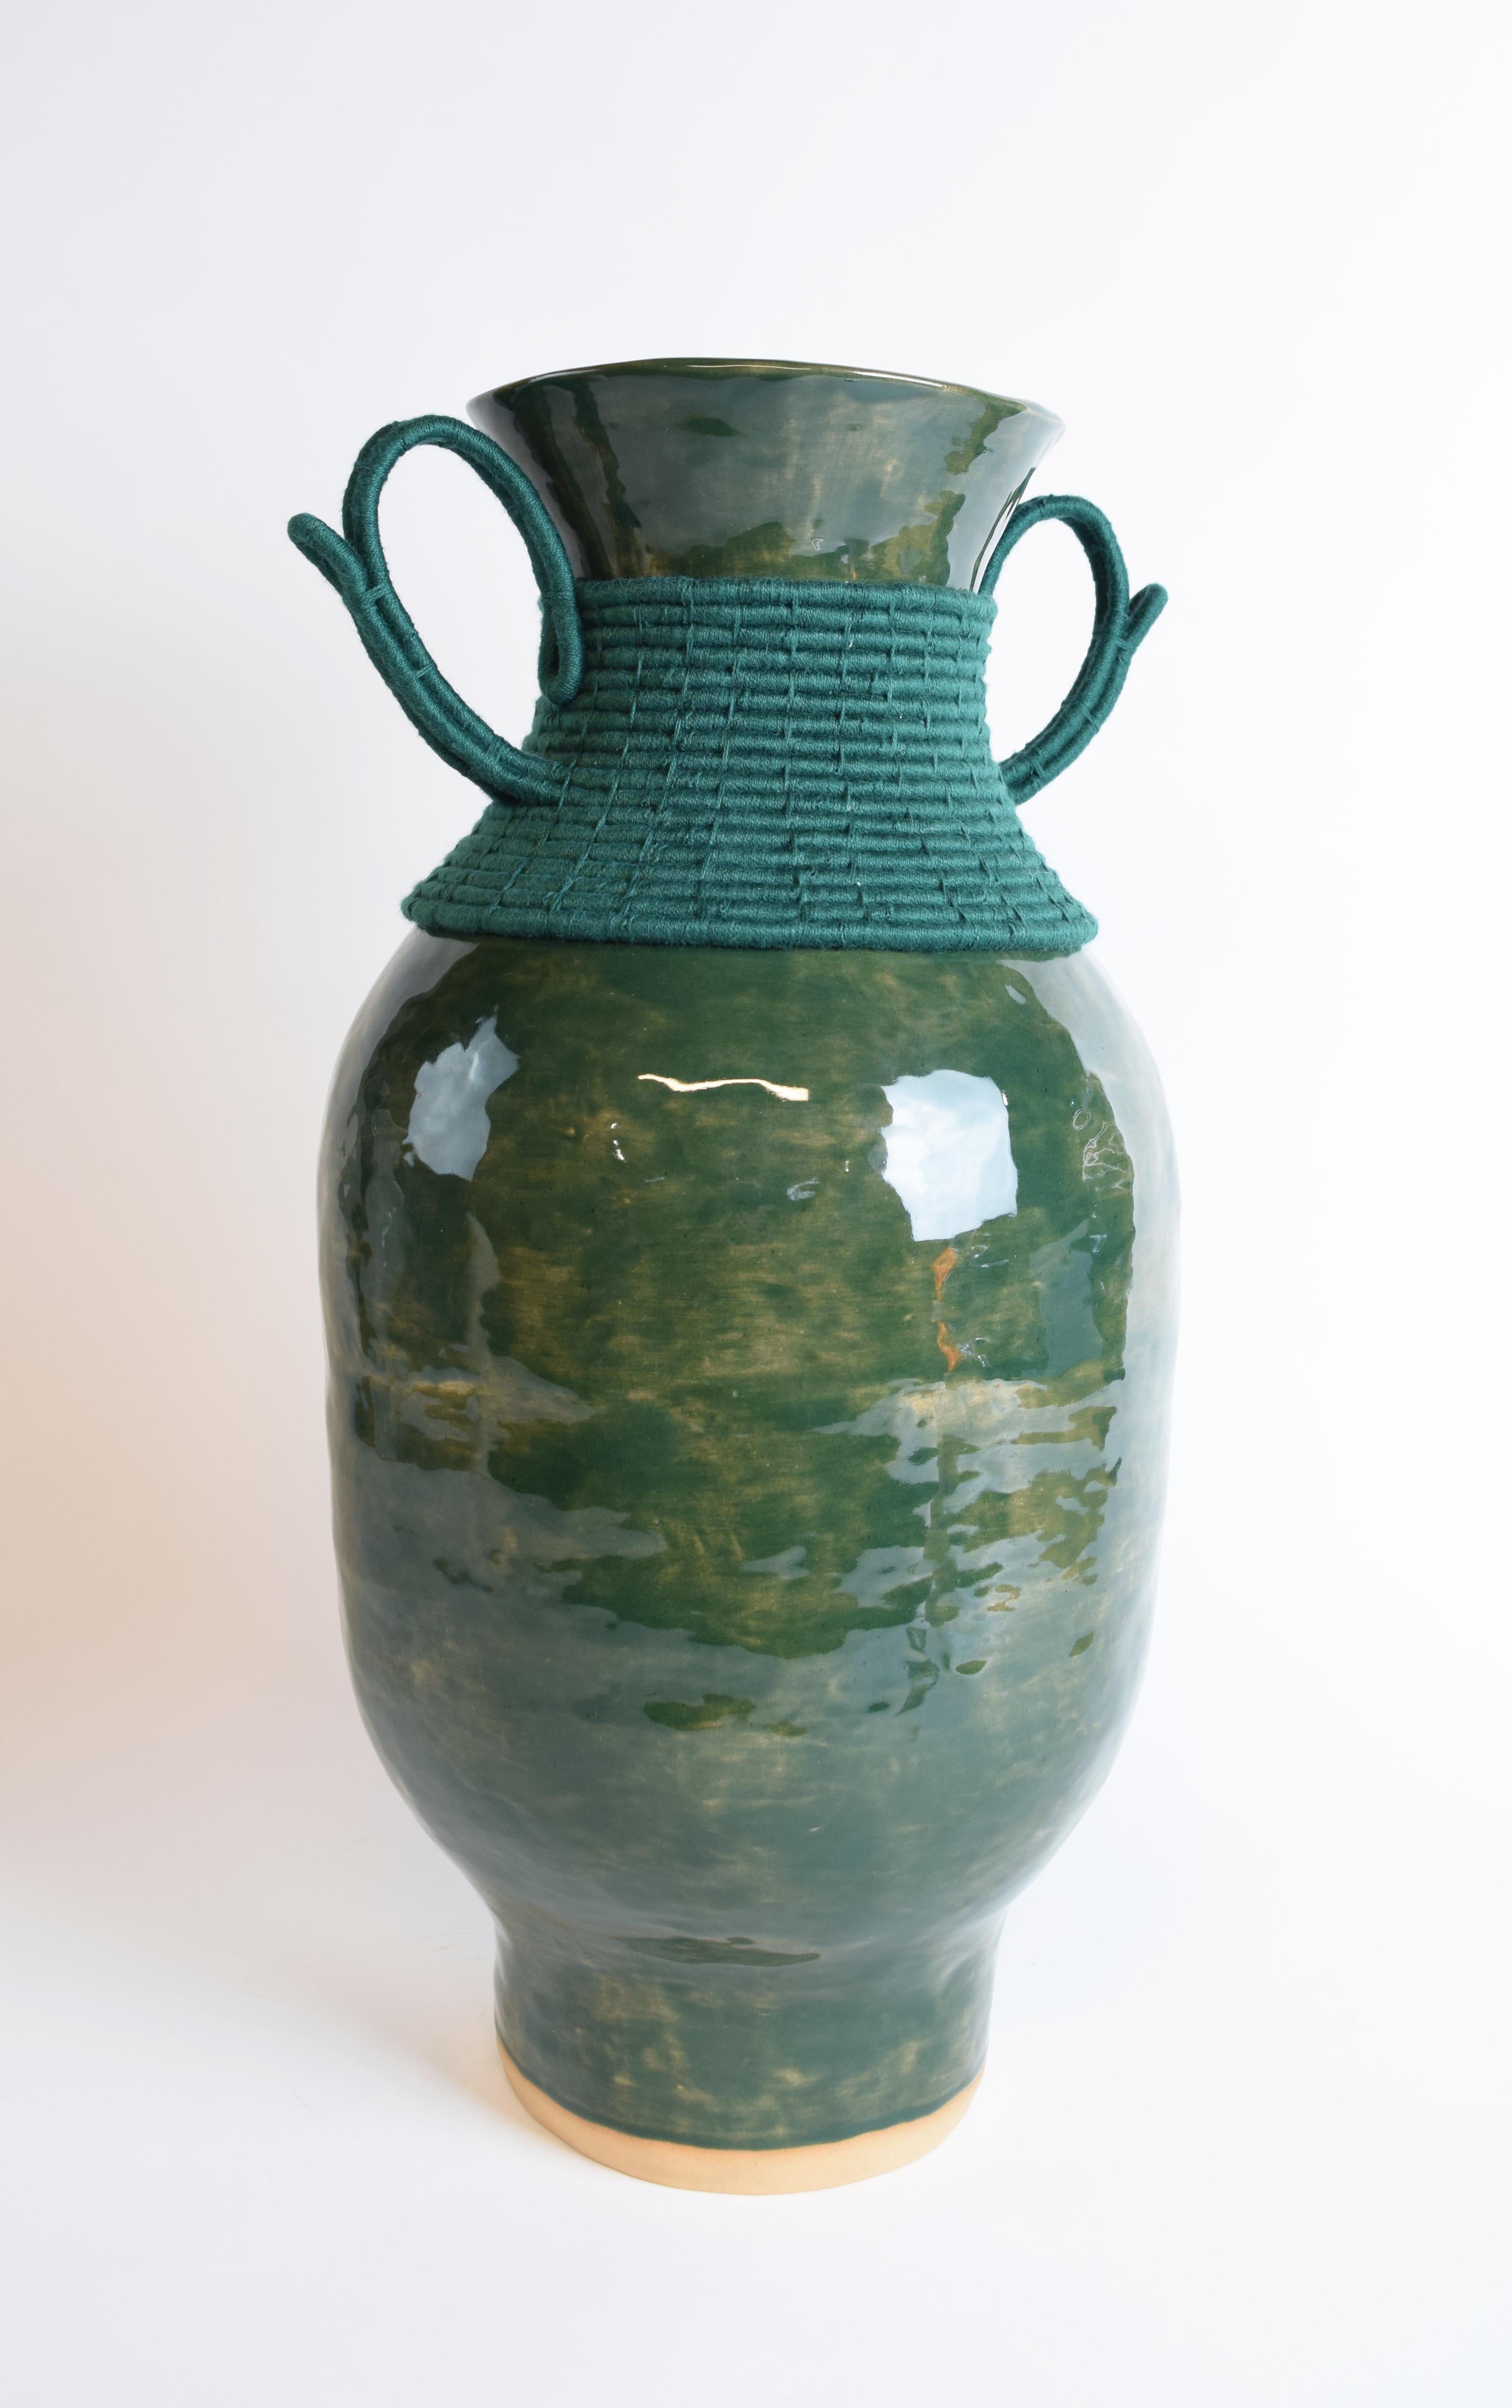 American One of a Kind Handmade Ceramic Vase #787, Green Glaze, Woven Green Cotton